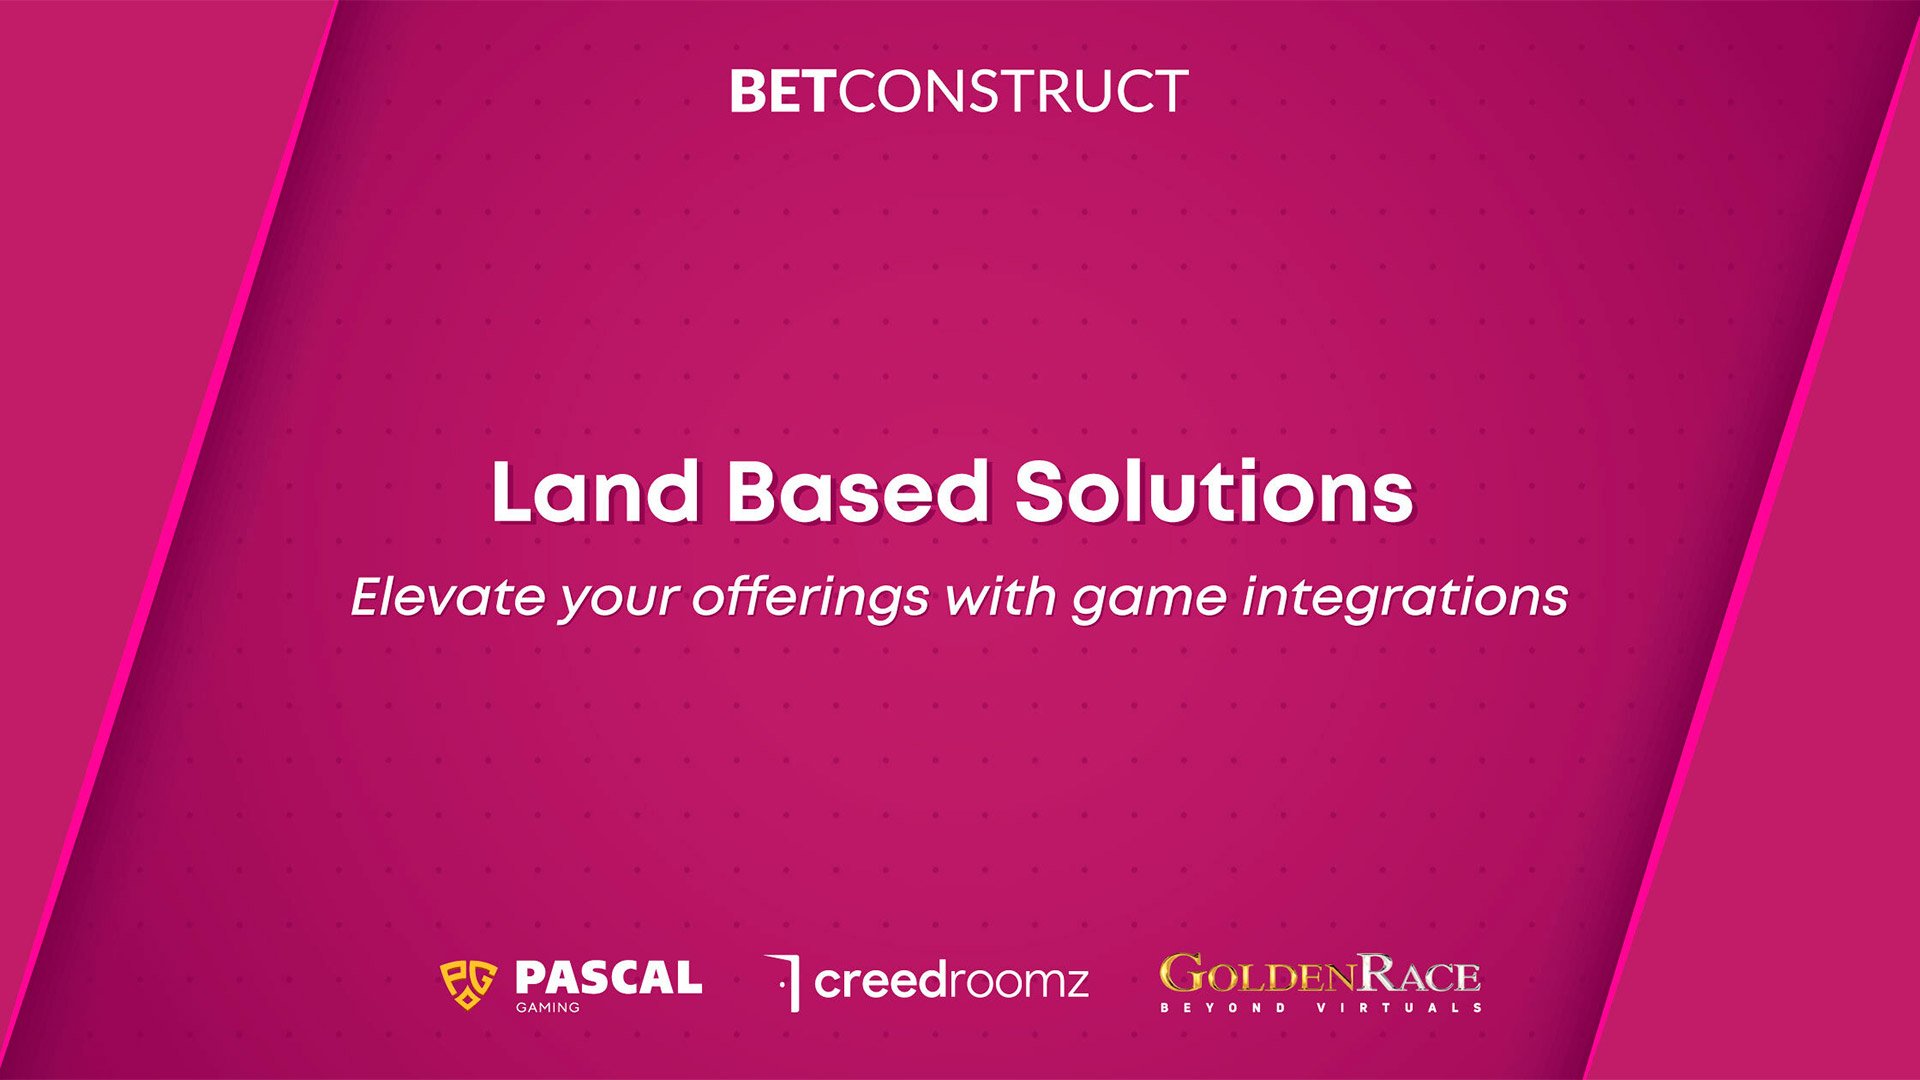 BetConstruct announces game integrations from three providers into Land Based Solutions